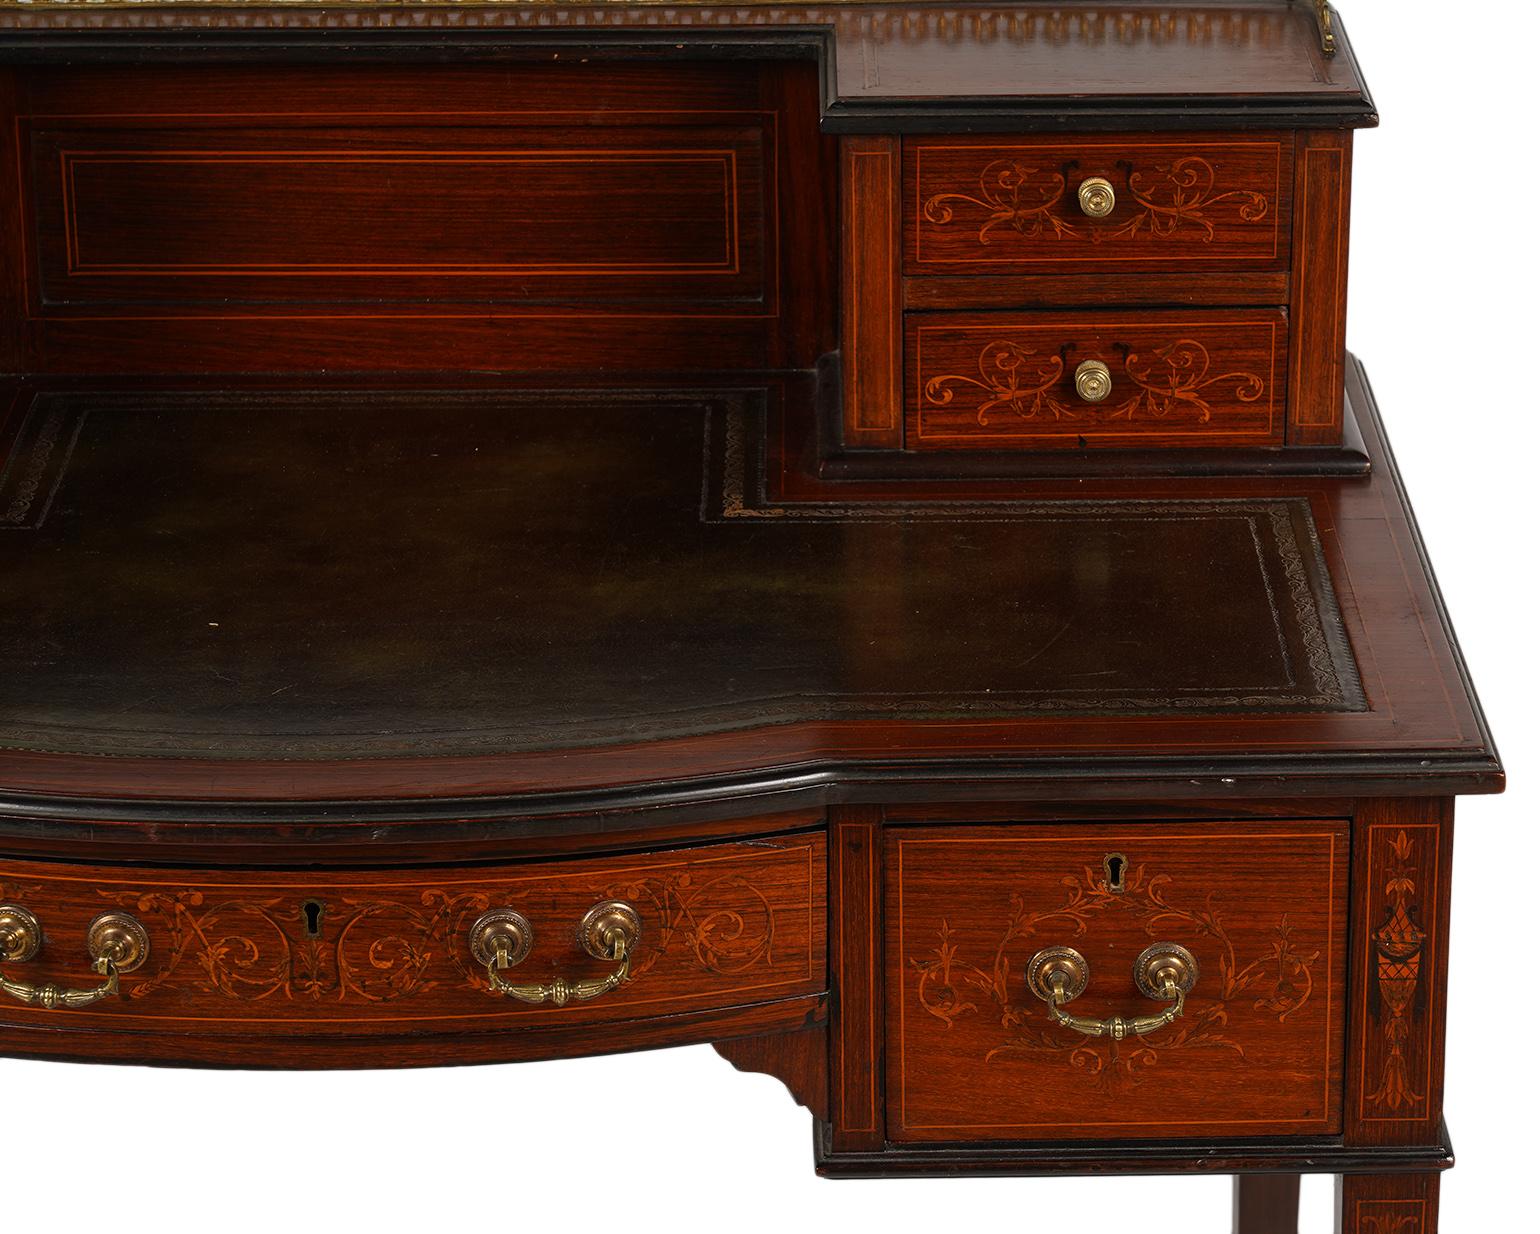 This Edwardian mahogany ladies writing desk is beautifully stringed and inlaid with satinwood. The upper section features a pierced brass top gallery and two drawers on each side. The shaped writing surface is lined with gilt tooled leather above a